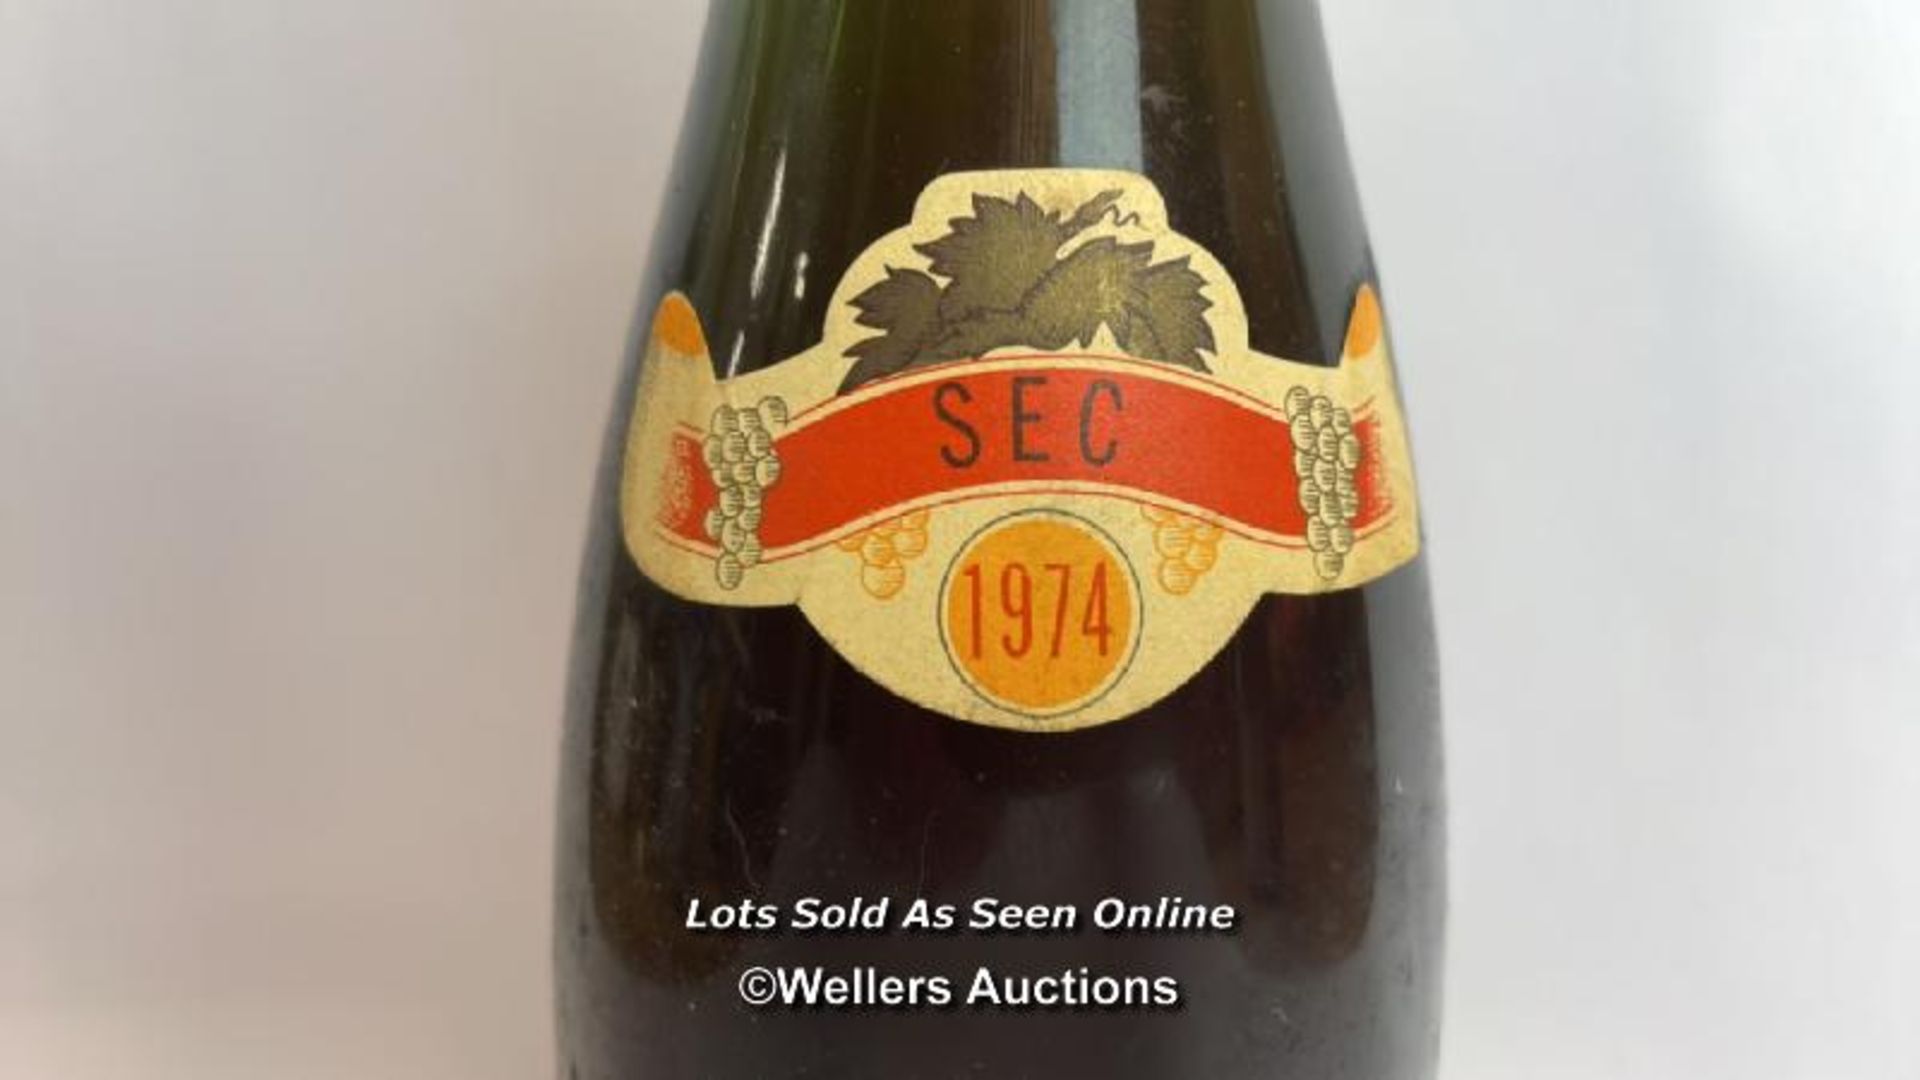 1974 Rose De Loire, 73cl, No vol indicated / Please see images for fill level and general condition. - Image 5 of 7